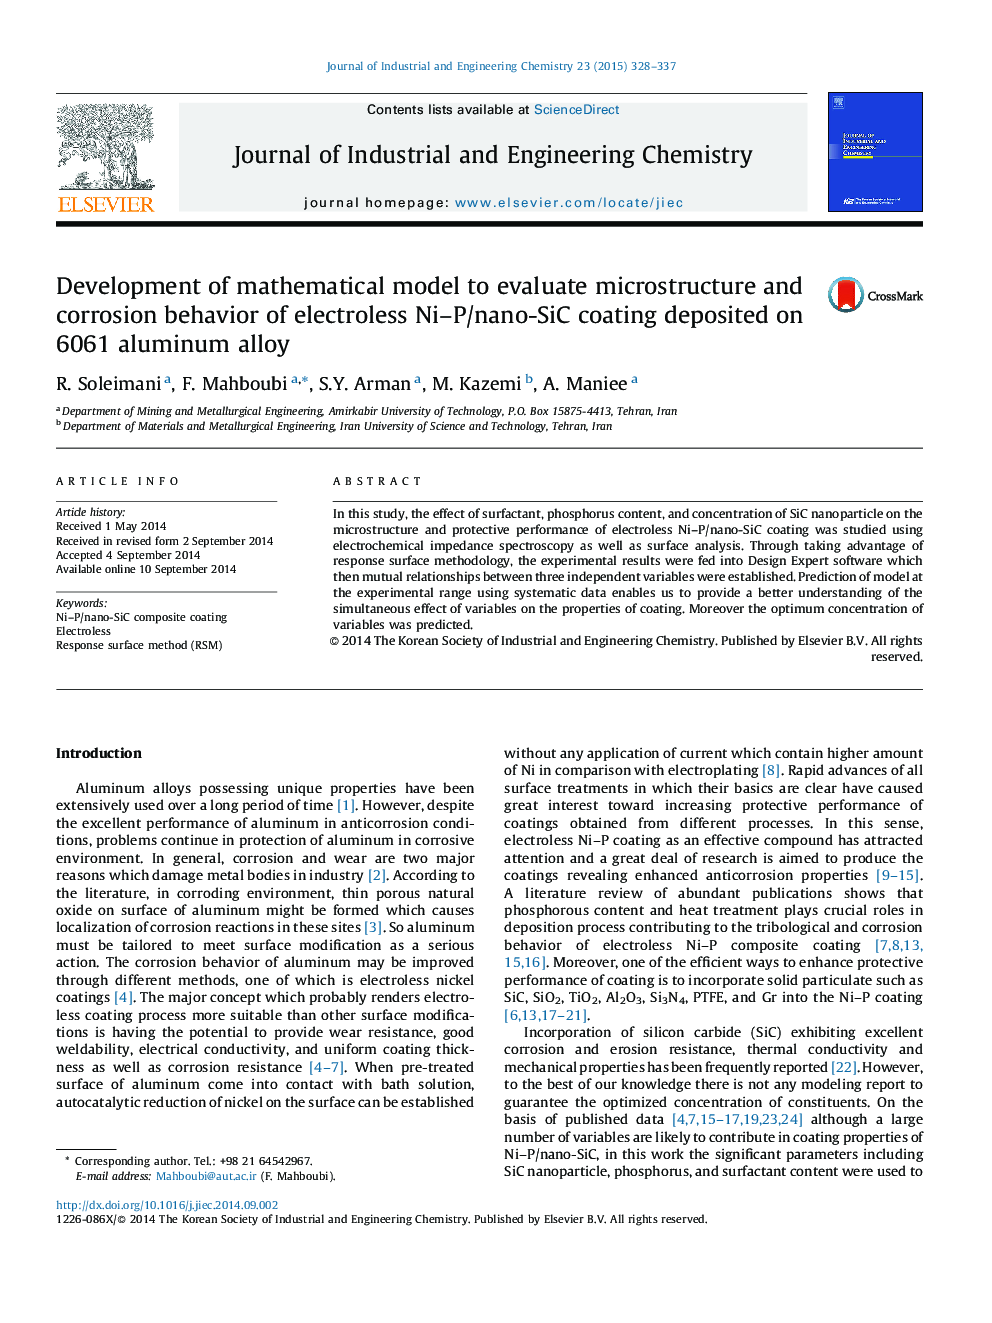 Development of mathematical model to evaluate microstructure and corrosion behavior of electroless Ni–P/nano-SiC coating deposited on 6061 aluminum alloy